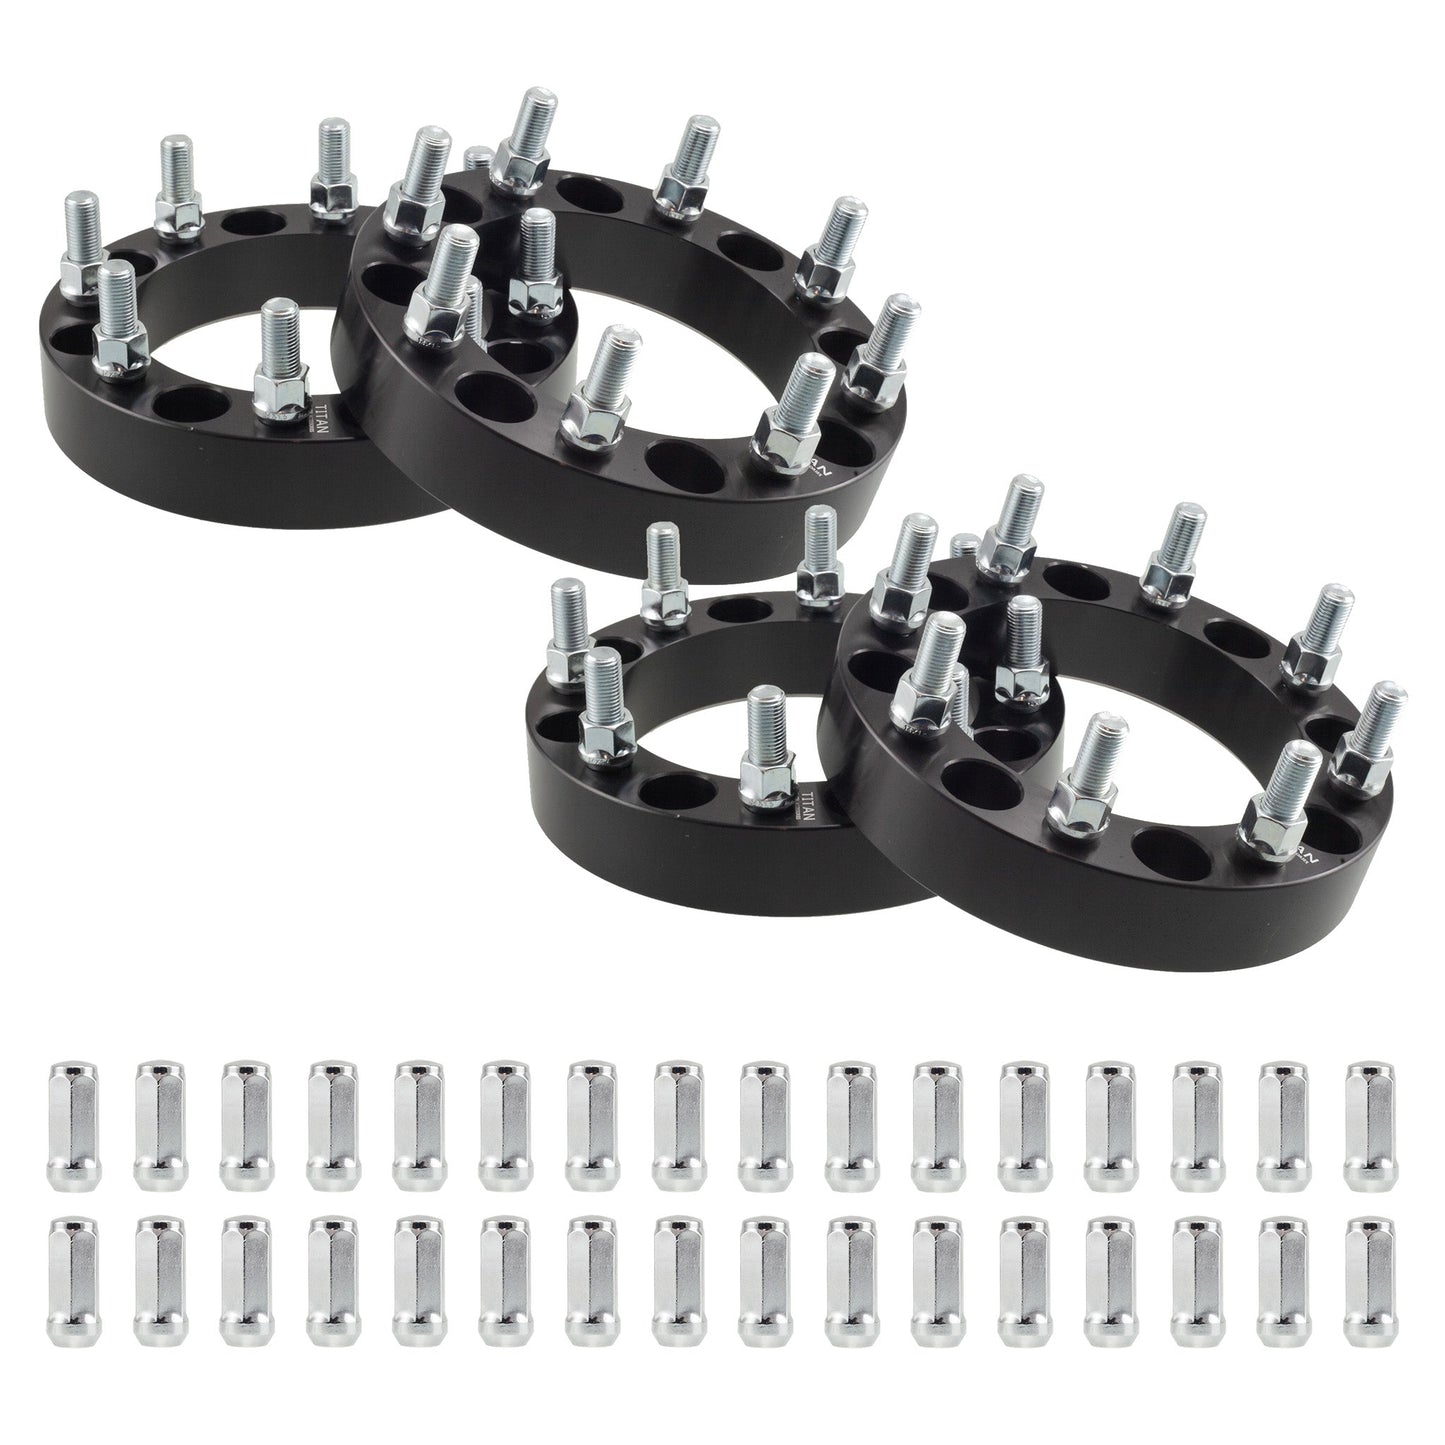 2" (50mm) Wheel Spacers for Nissan NV Ram 2500 3500 | 8x6.5 | 121.3 Hubcentric |14x1.5 Studs |